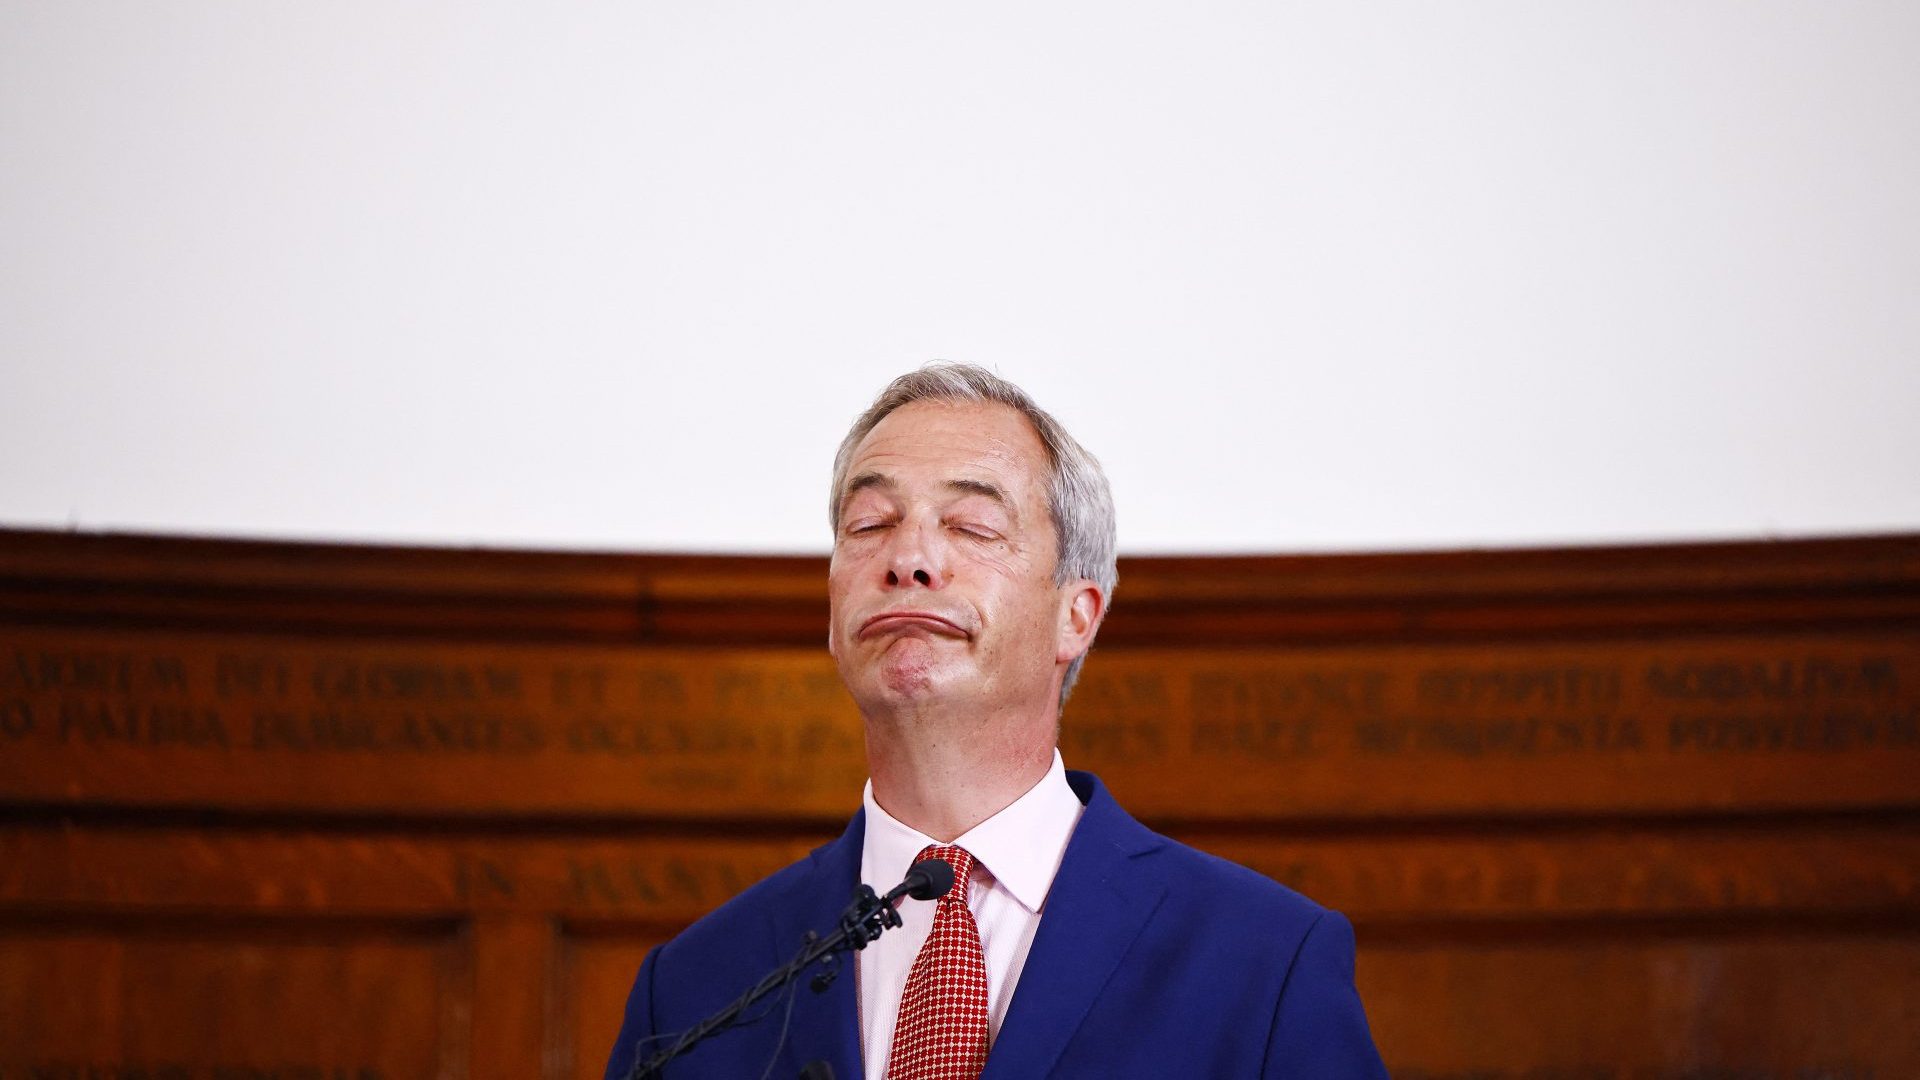 Nigel Farage has said his Reform Party’s general election result was ‘just the start’. But was it really? Photo: Benjamin Cremel/AFP/Getty